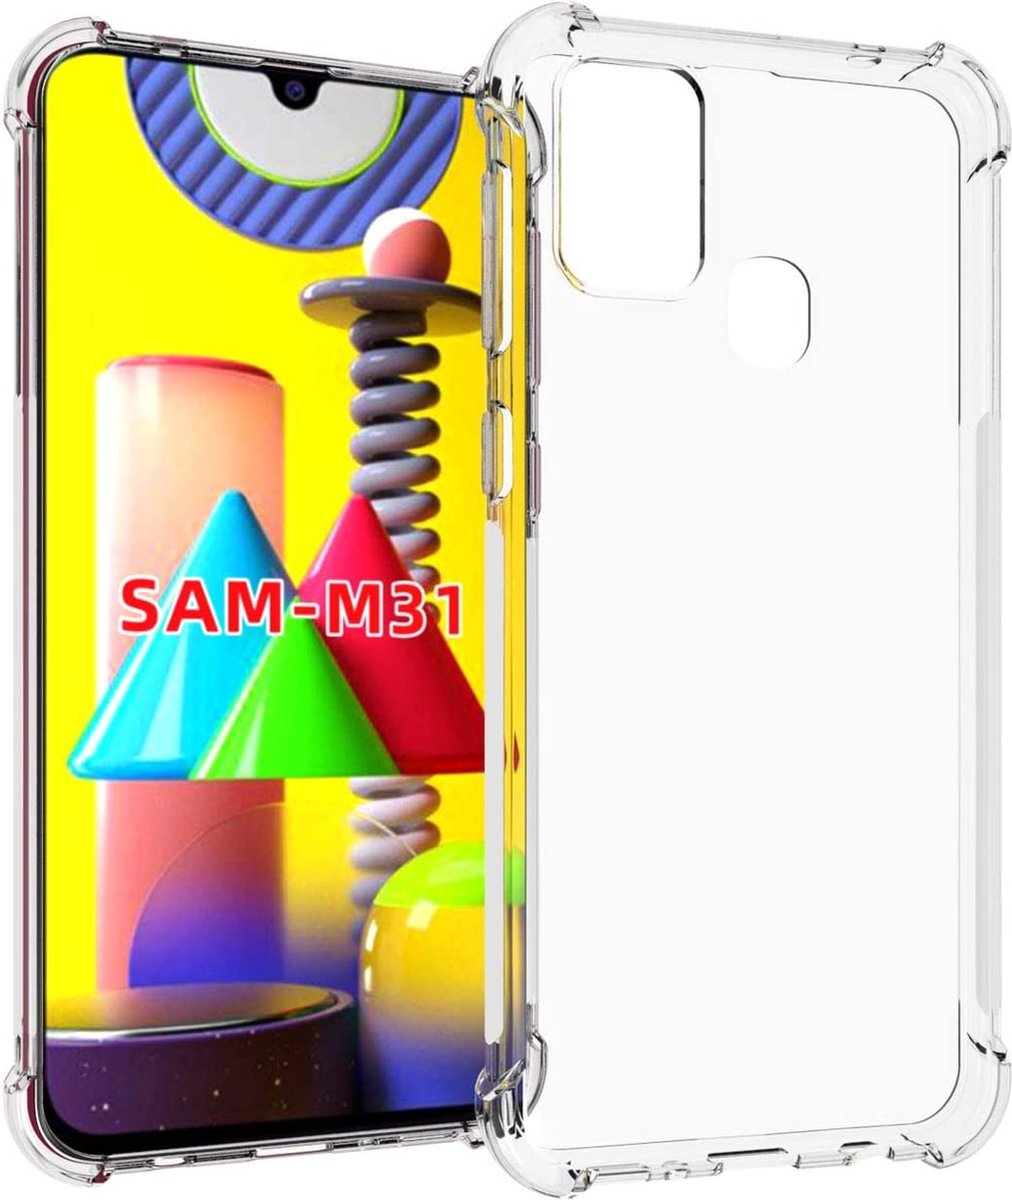 Hoesje geschikt voor Samsung Galaxy M31 - Clear Anti Shock Hybrid Armor Case Siliconen Back Cover Hoes Transparant